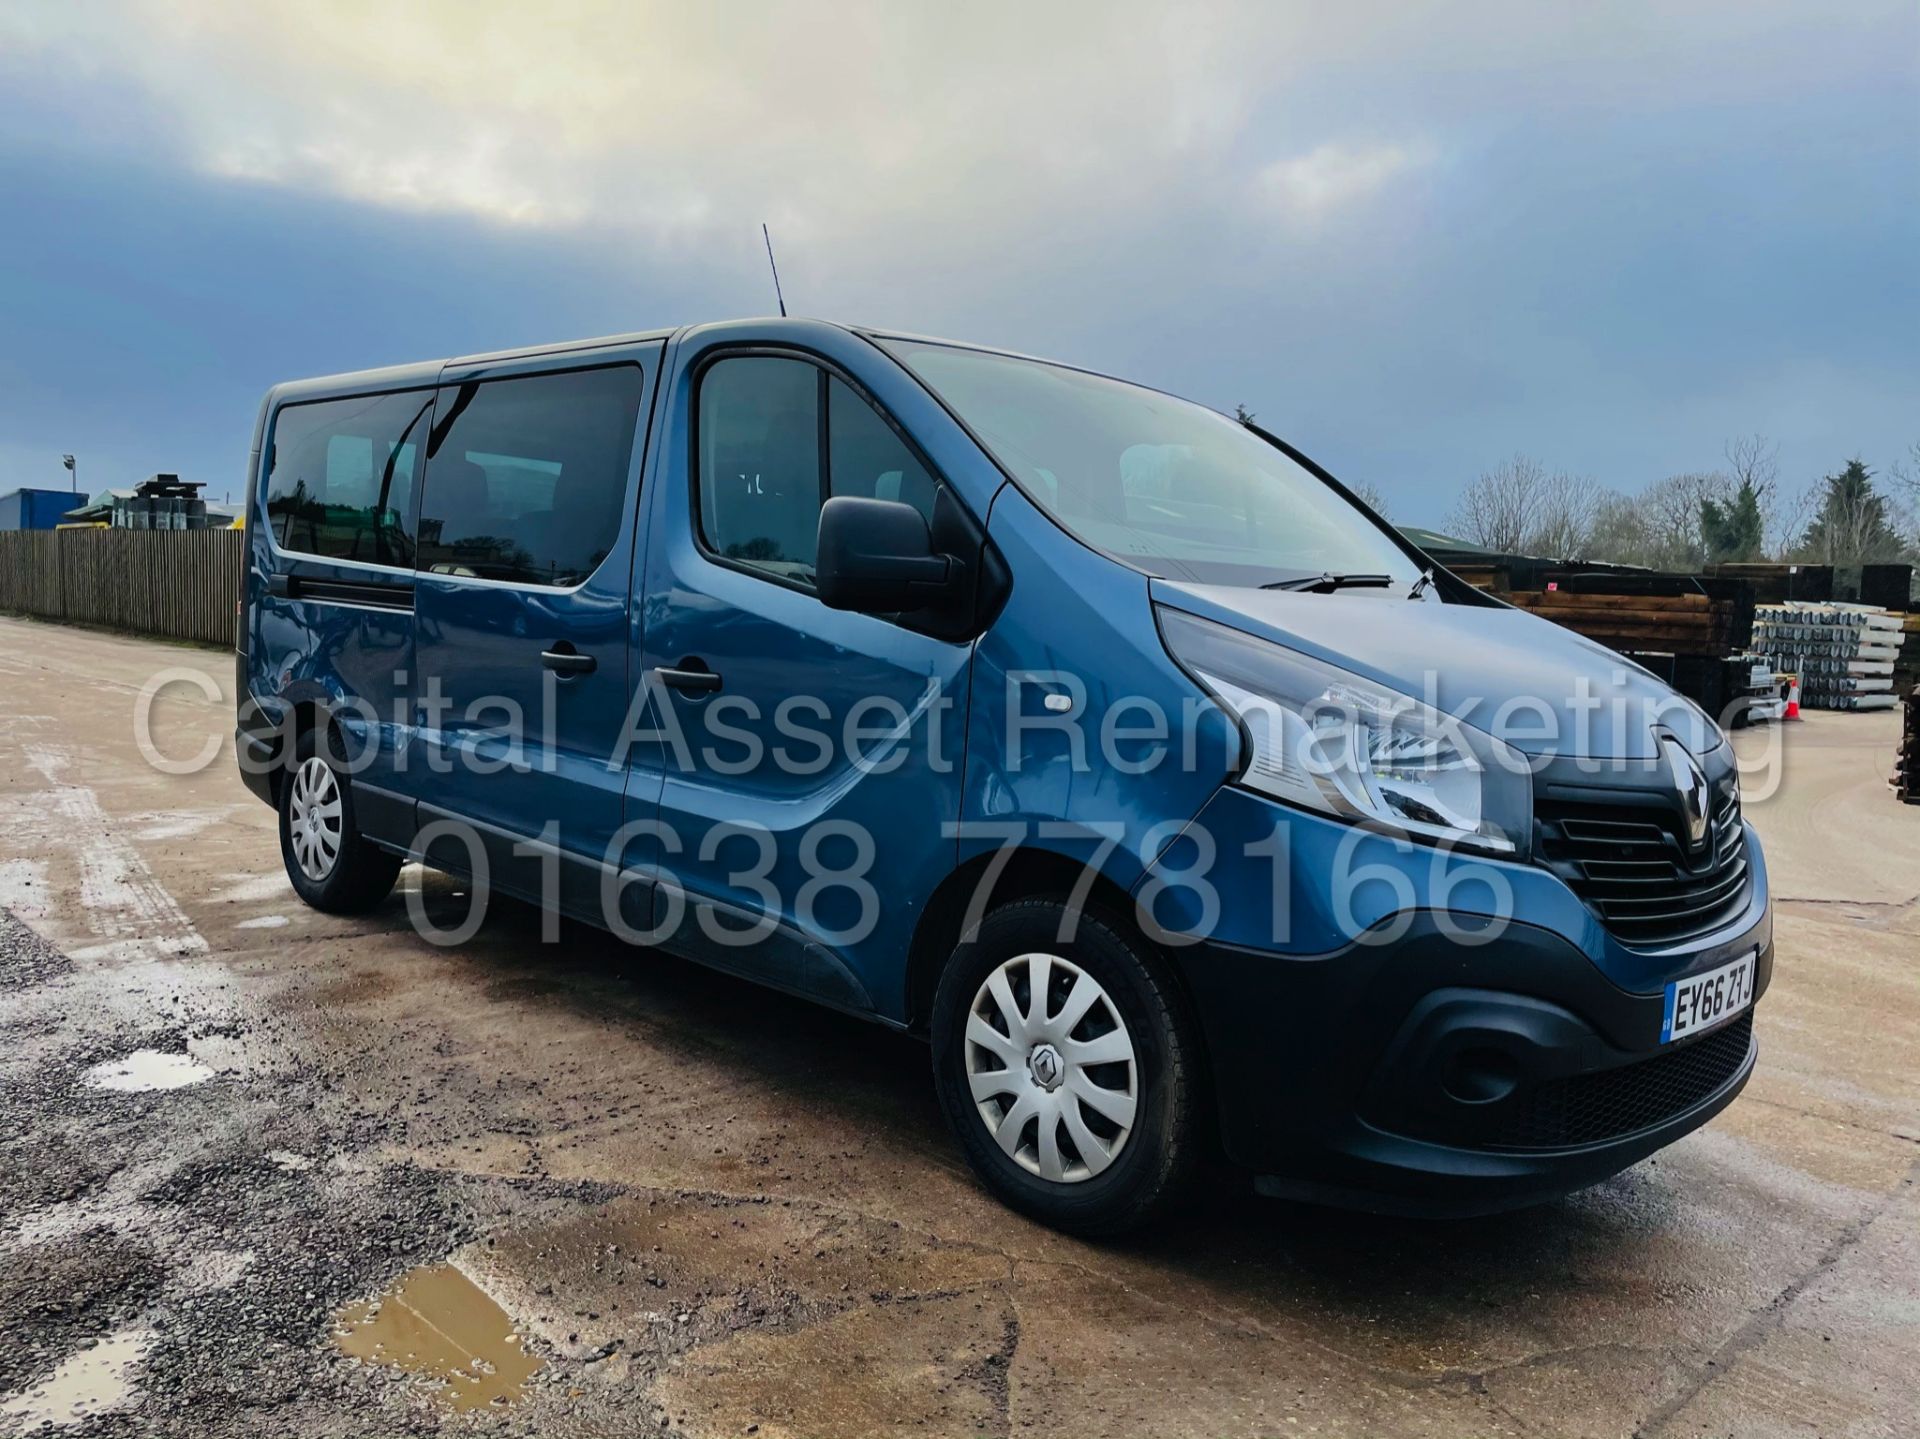 (ON SALE) RENAULT TRAFIC *LWB - 9 SEATER BUS* (2017 - EURO 6) '1.6 DCI - 6 SPEED' *AIR CON* (NO VAT) - Image 12 of 47